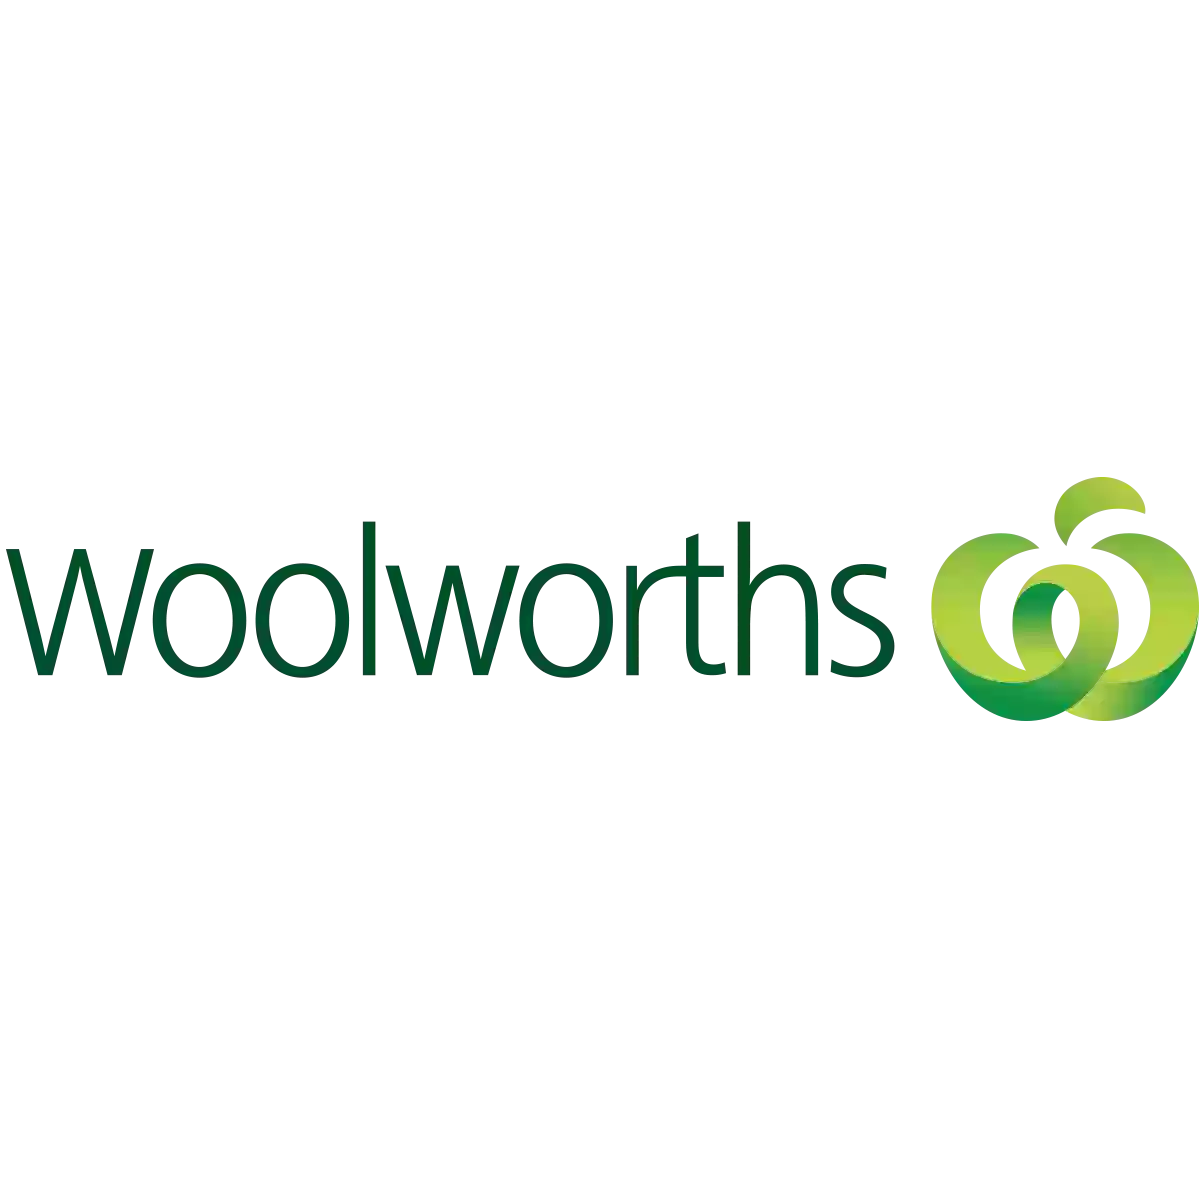 Woolworths Vermont